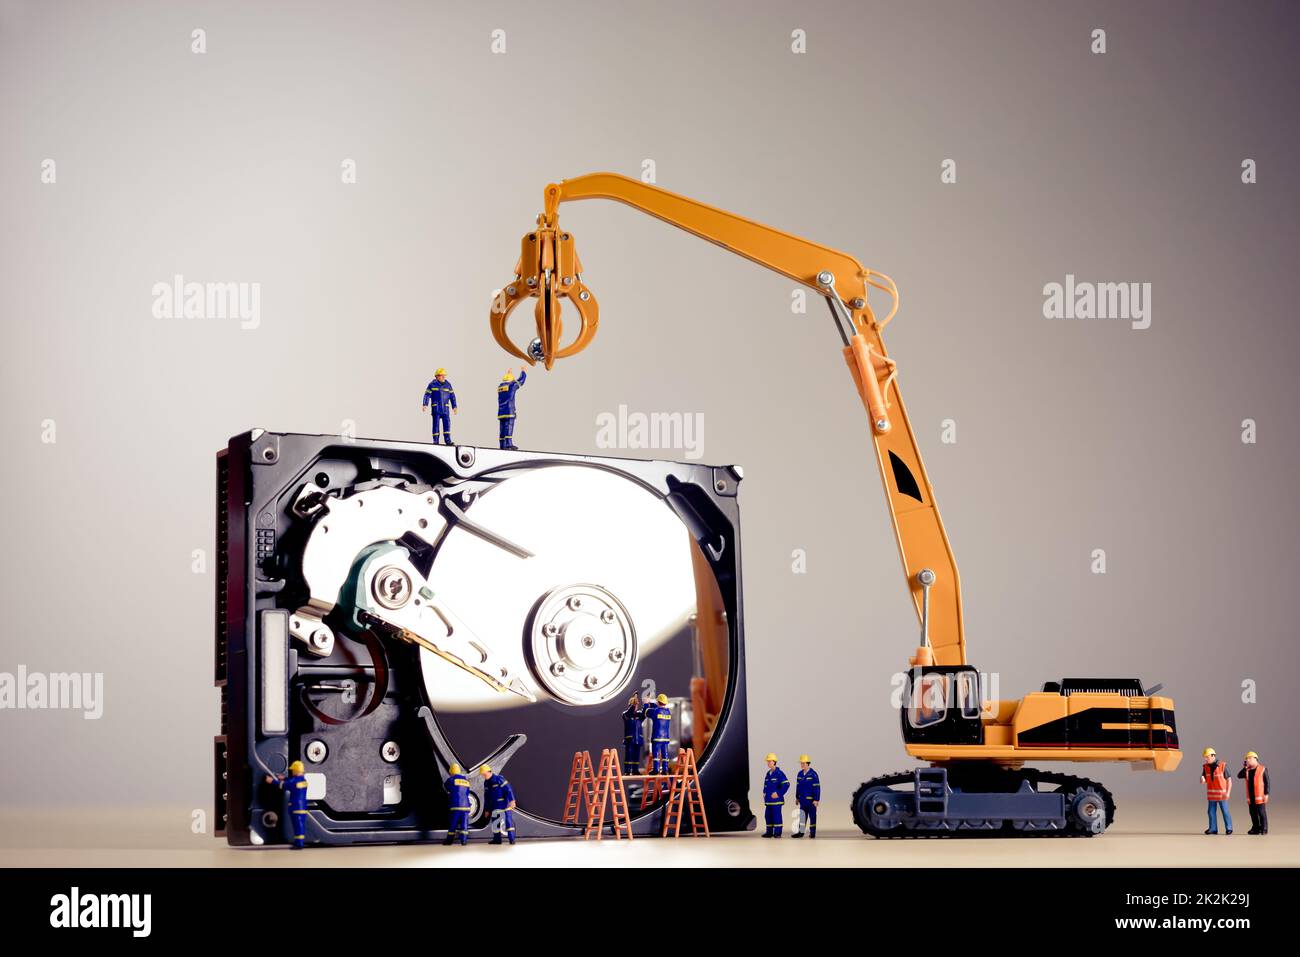 Repair of the dismantled hard drive Stock Photo